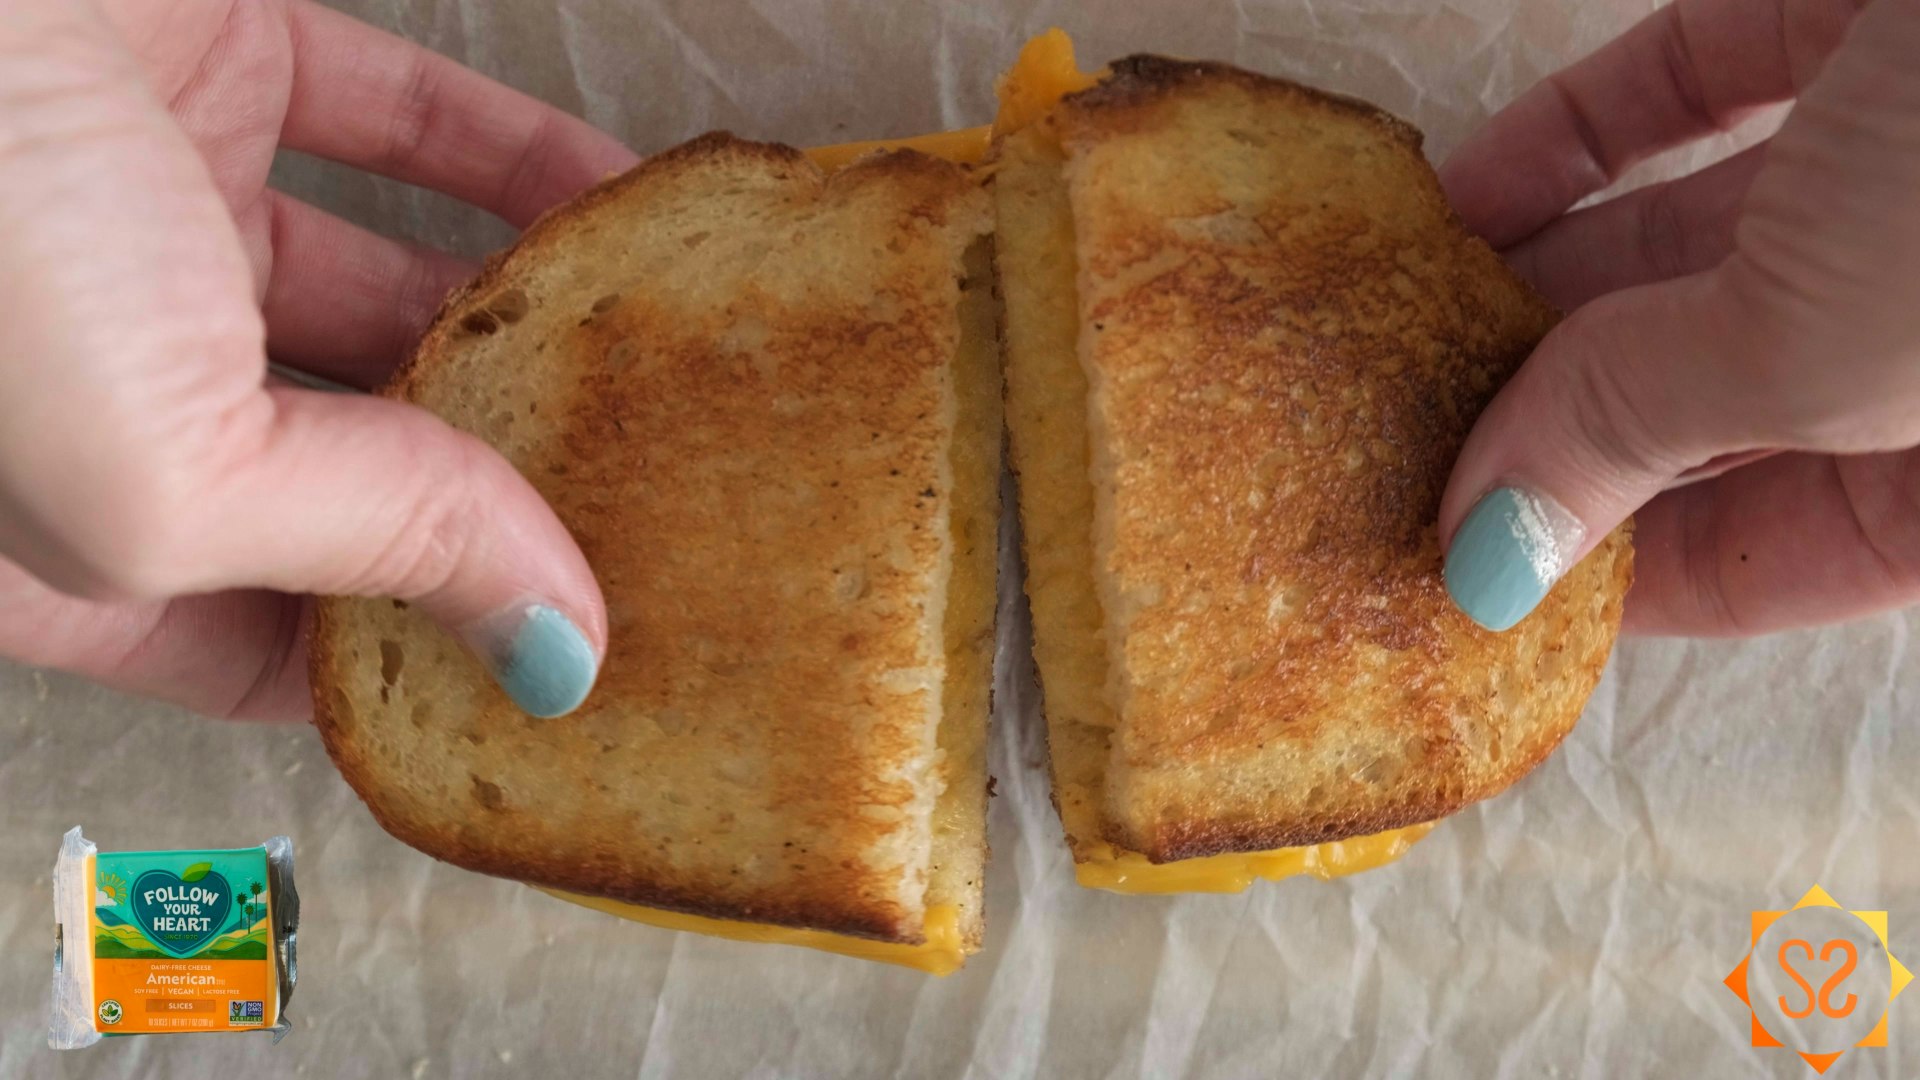 Two hands pulling apart a grilled cheese sandwich made with Follow Your Heart American